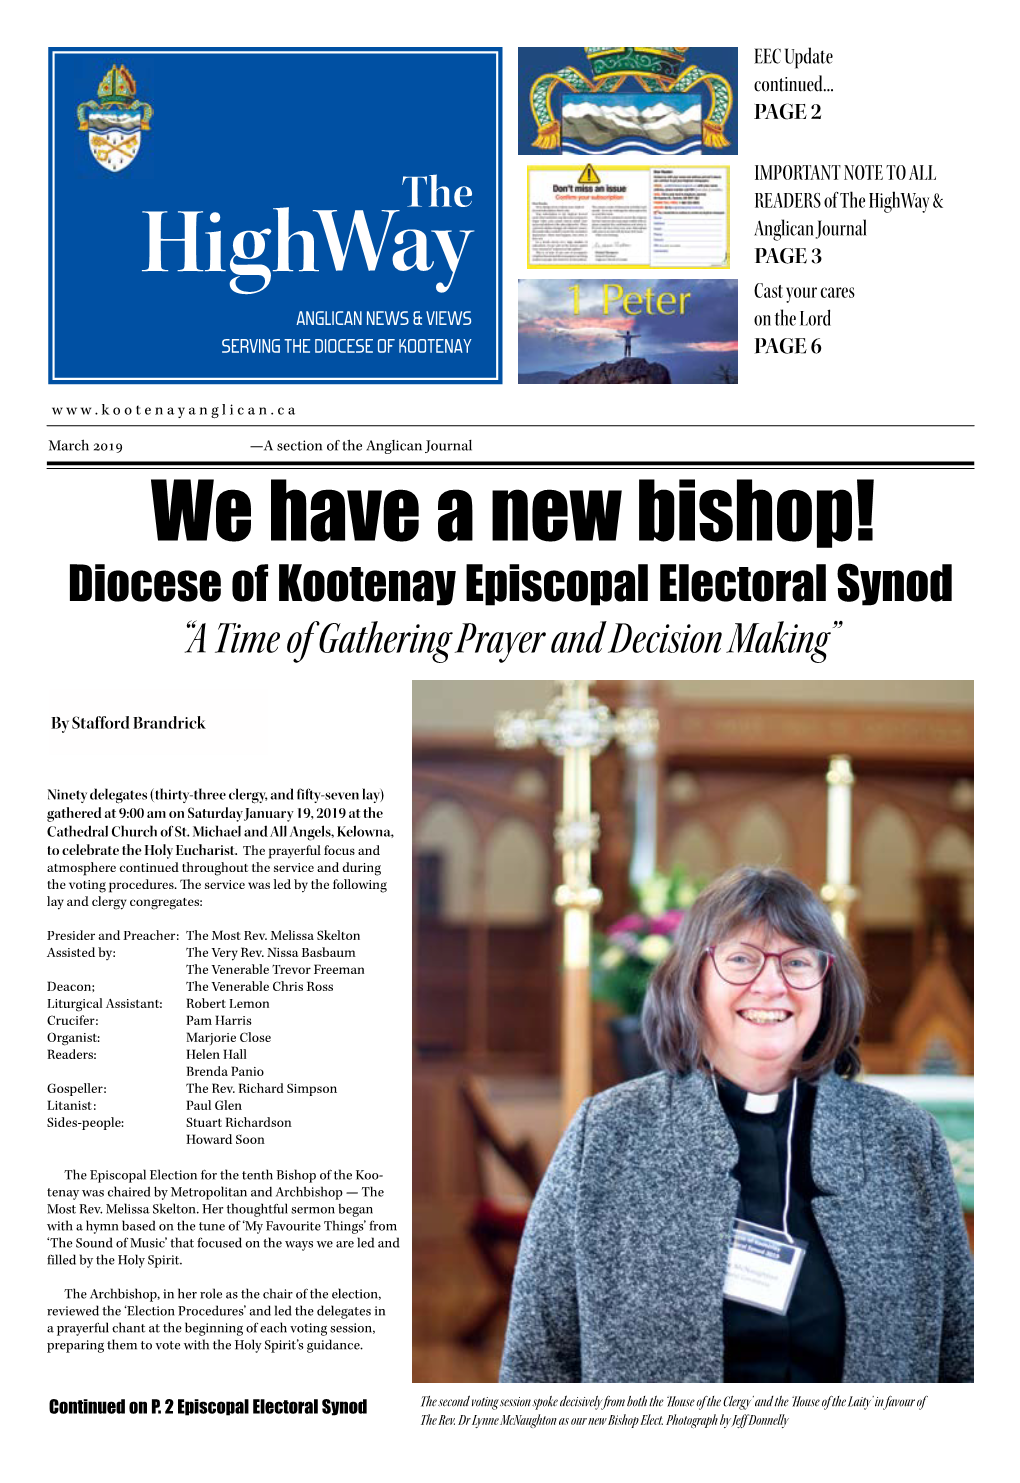 We Have a New Bishop! Diocese of Kootenay Episcopal Electoral Synod “A Time of Gathering Prayer and Decision Making”